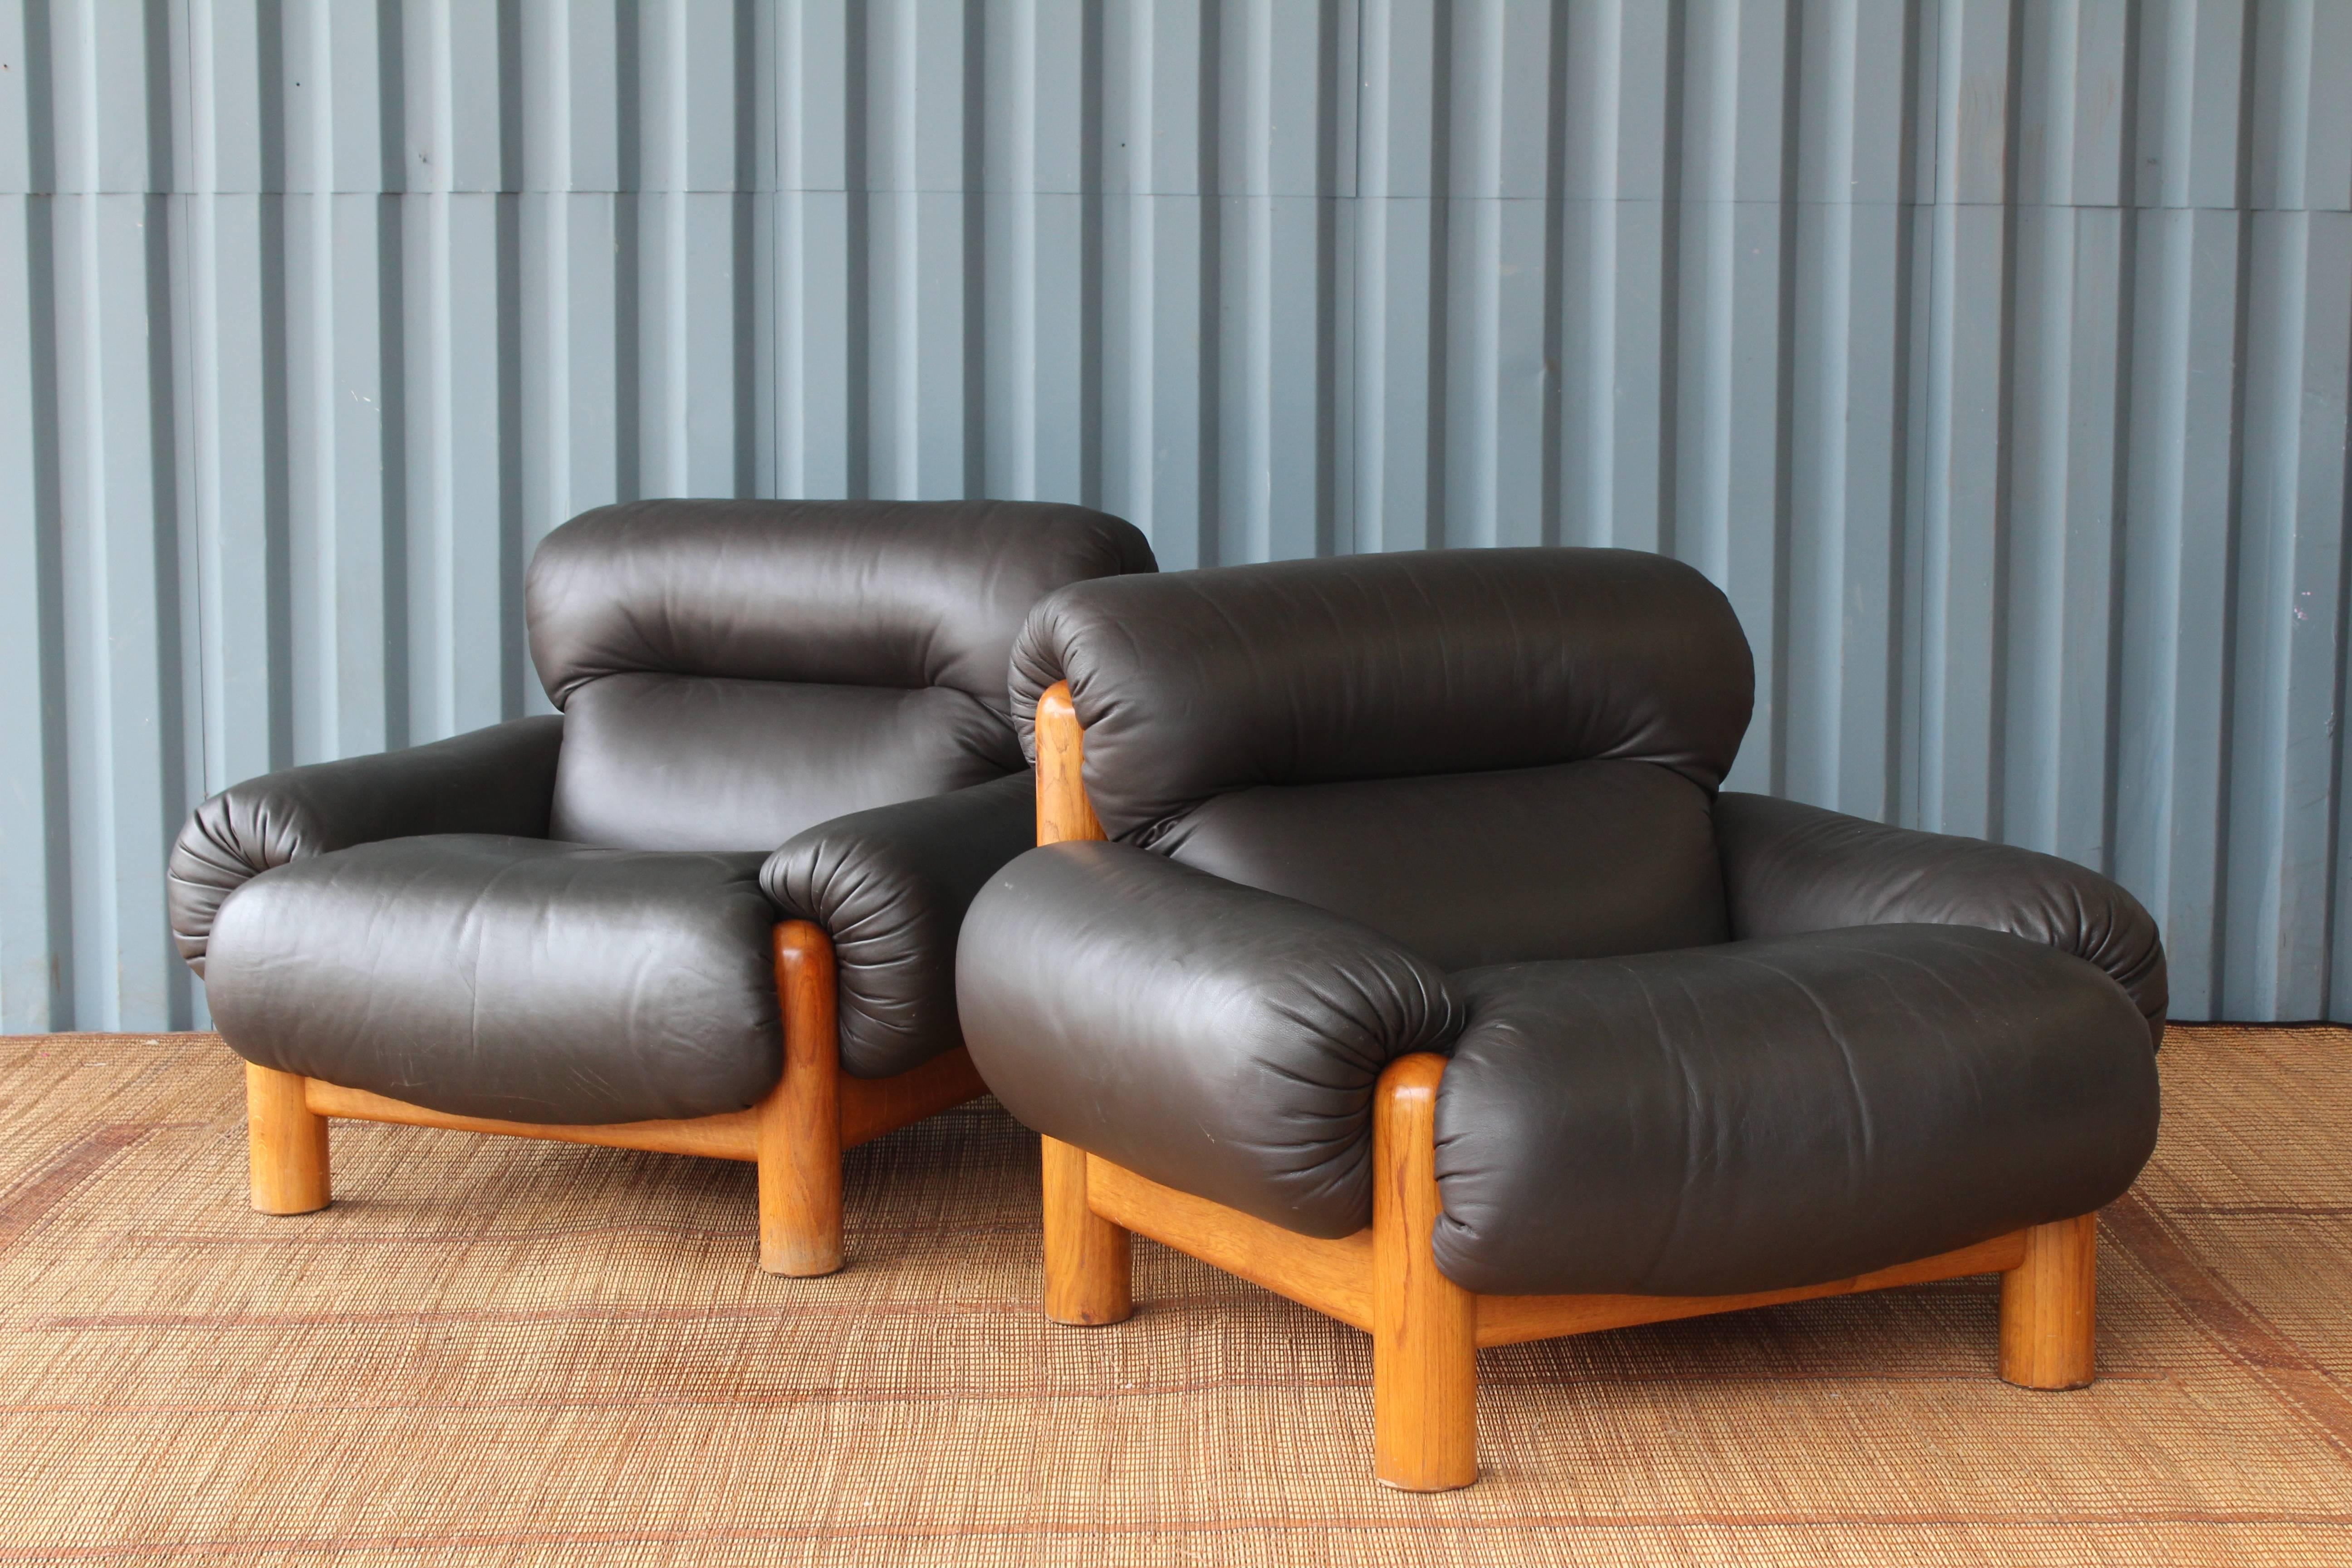 Pair of large and overstuffed lounge chairs with oak frames and leather upholstery. The pair are in fantastic condition.